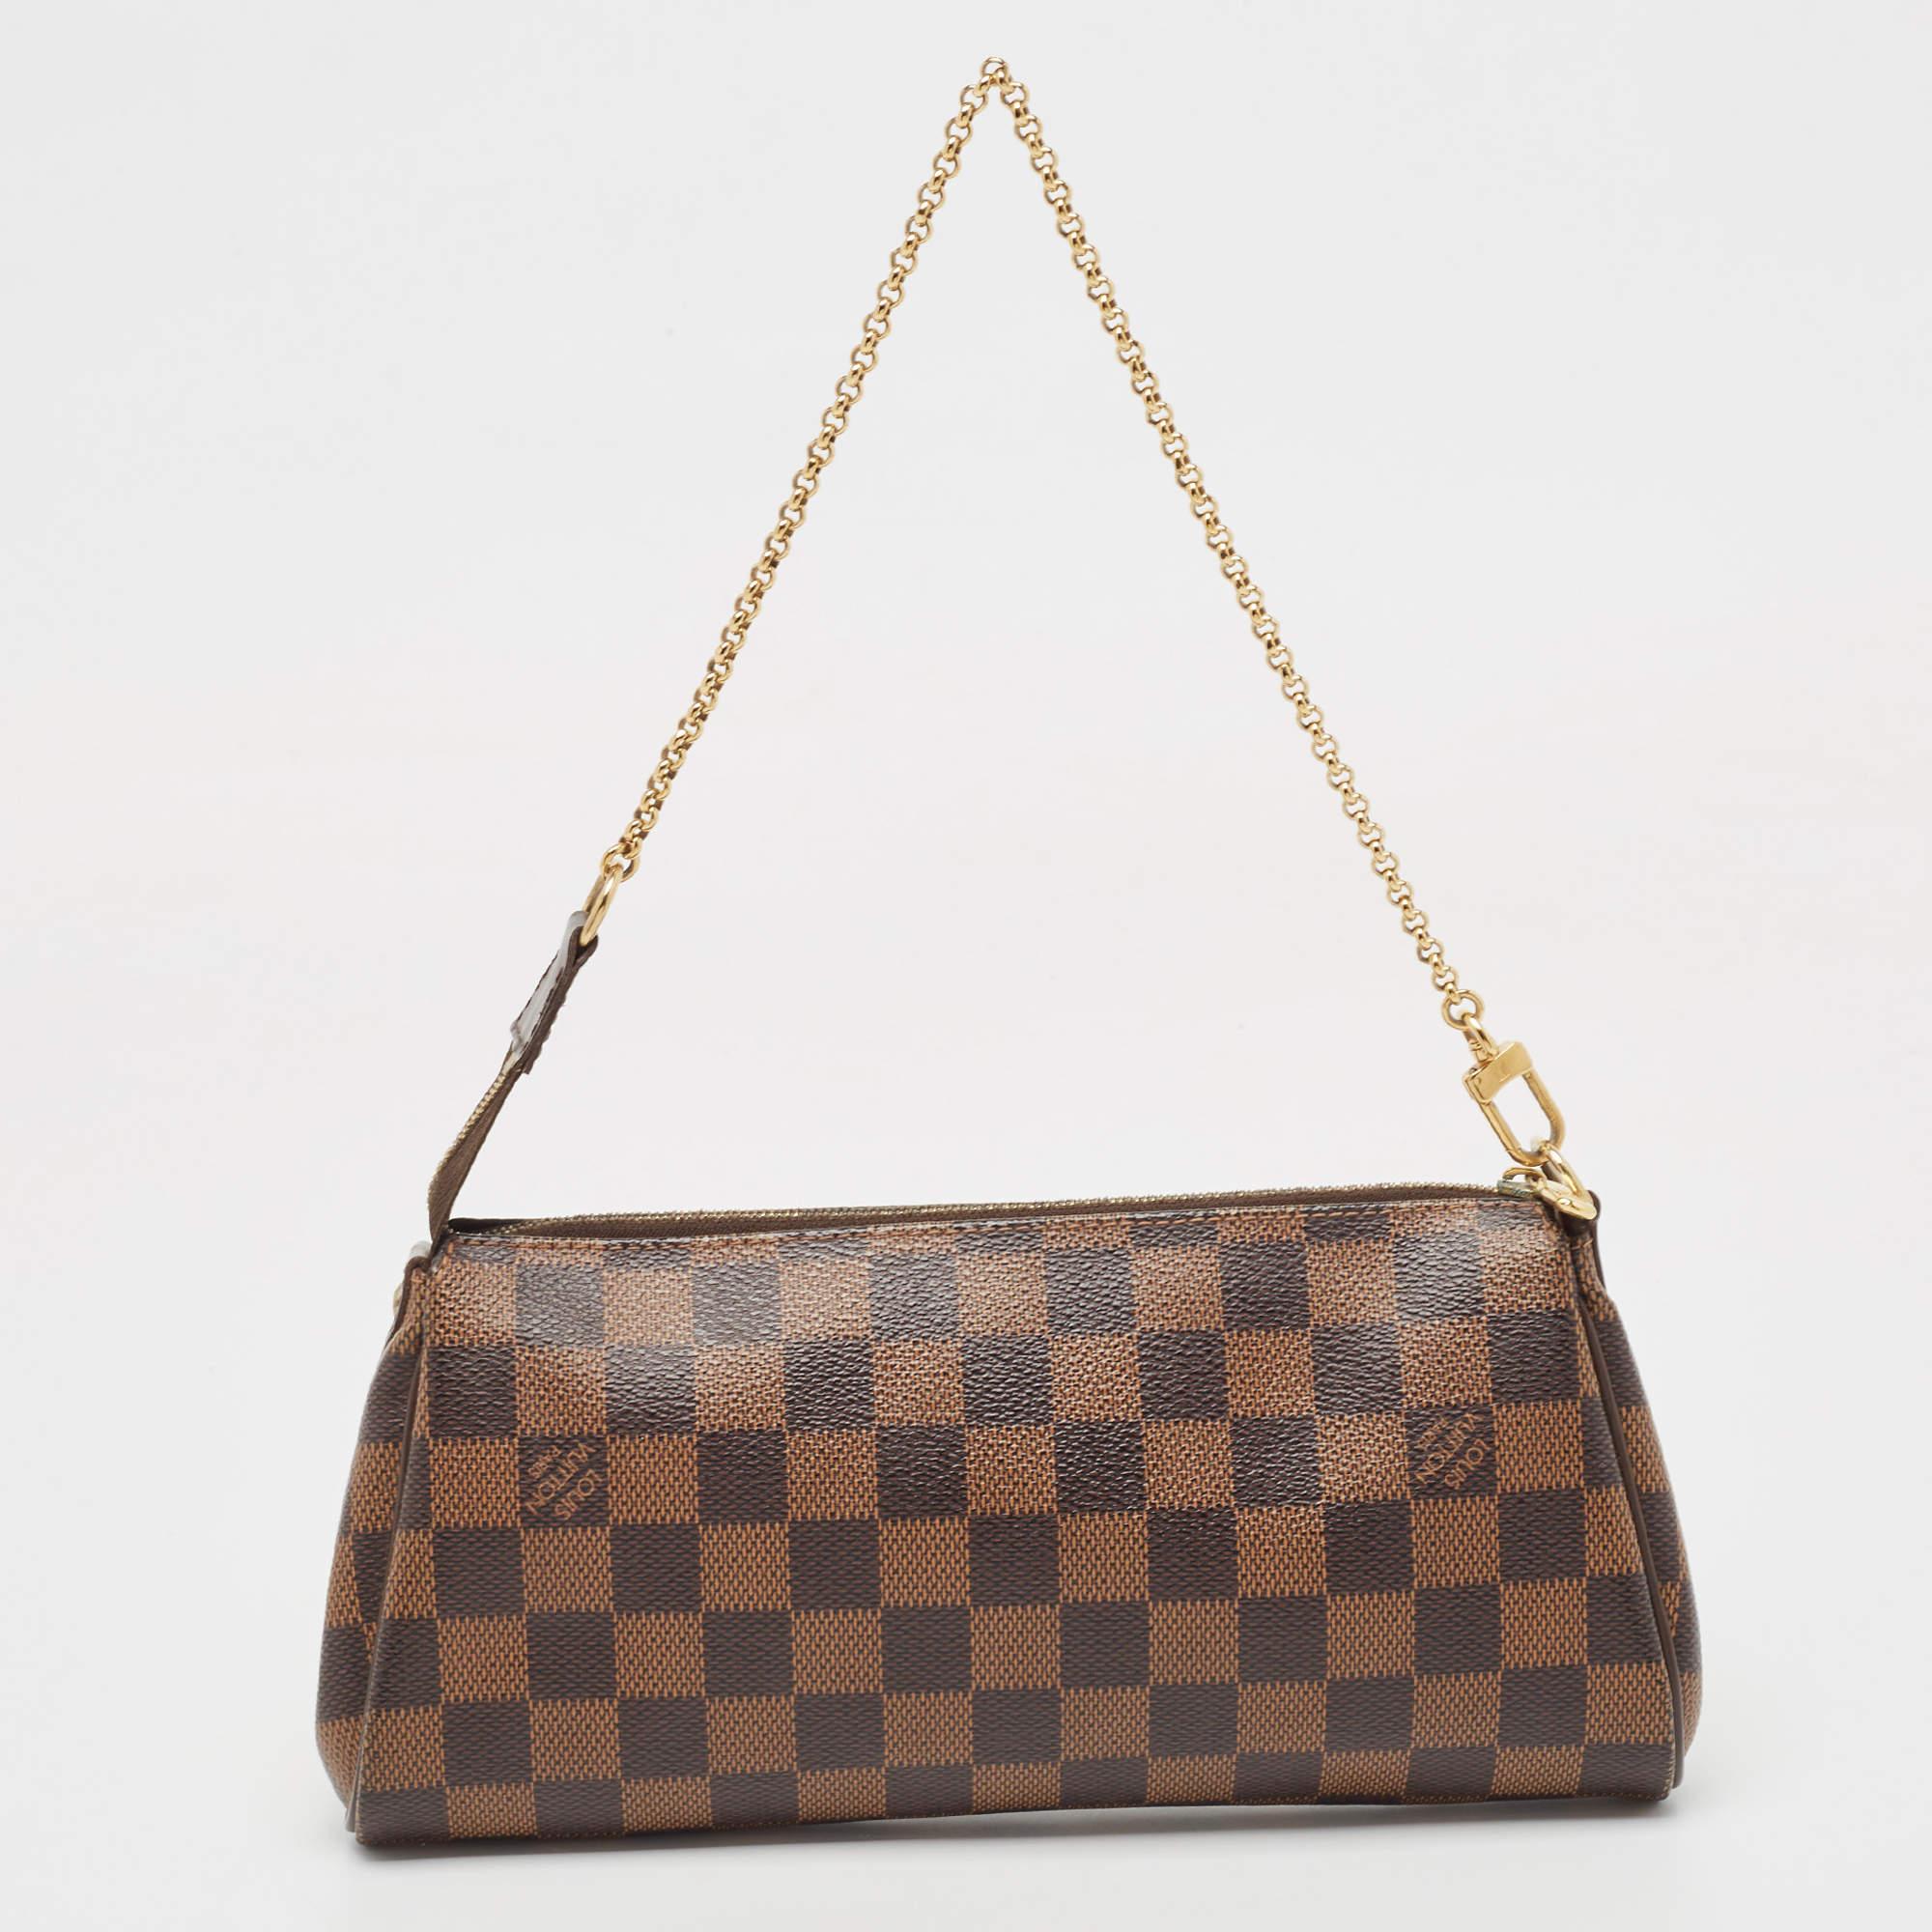 Crafted from Damier Ebene canvas, this Eva Pochette bag is a creation by Louis Vuitton. The bag features a well-sized canvas interior that is secured by a gold-tone zipper. It comes with a chain and a leather strap.

Includes: Detachable Strap